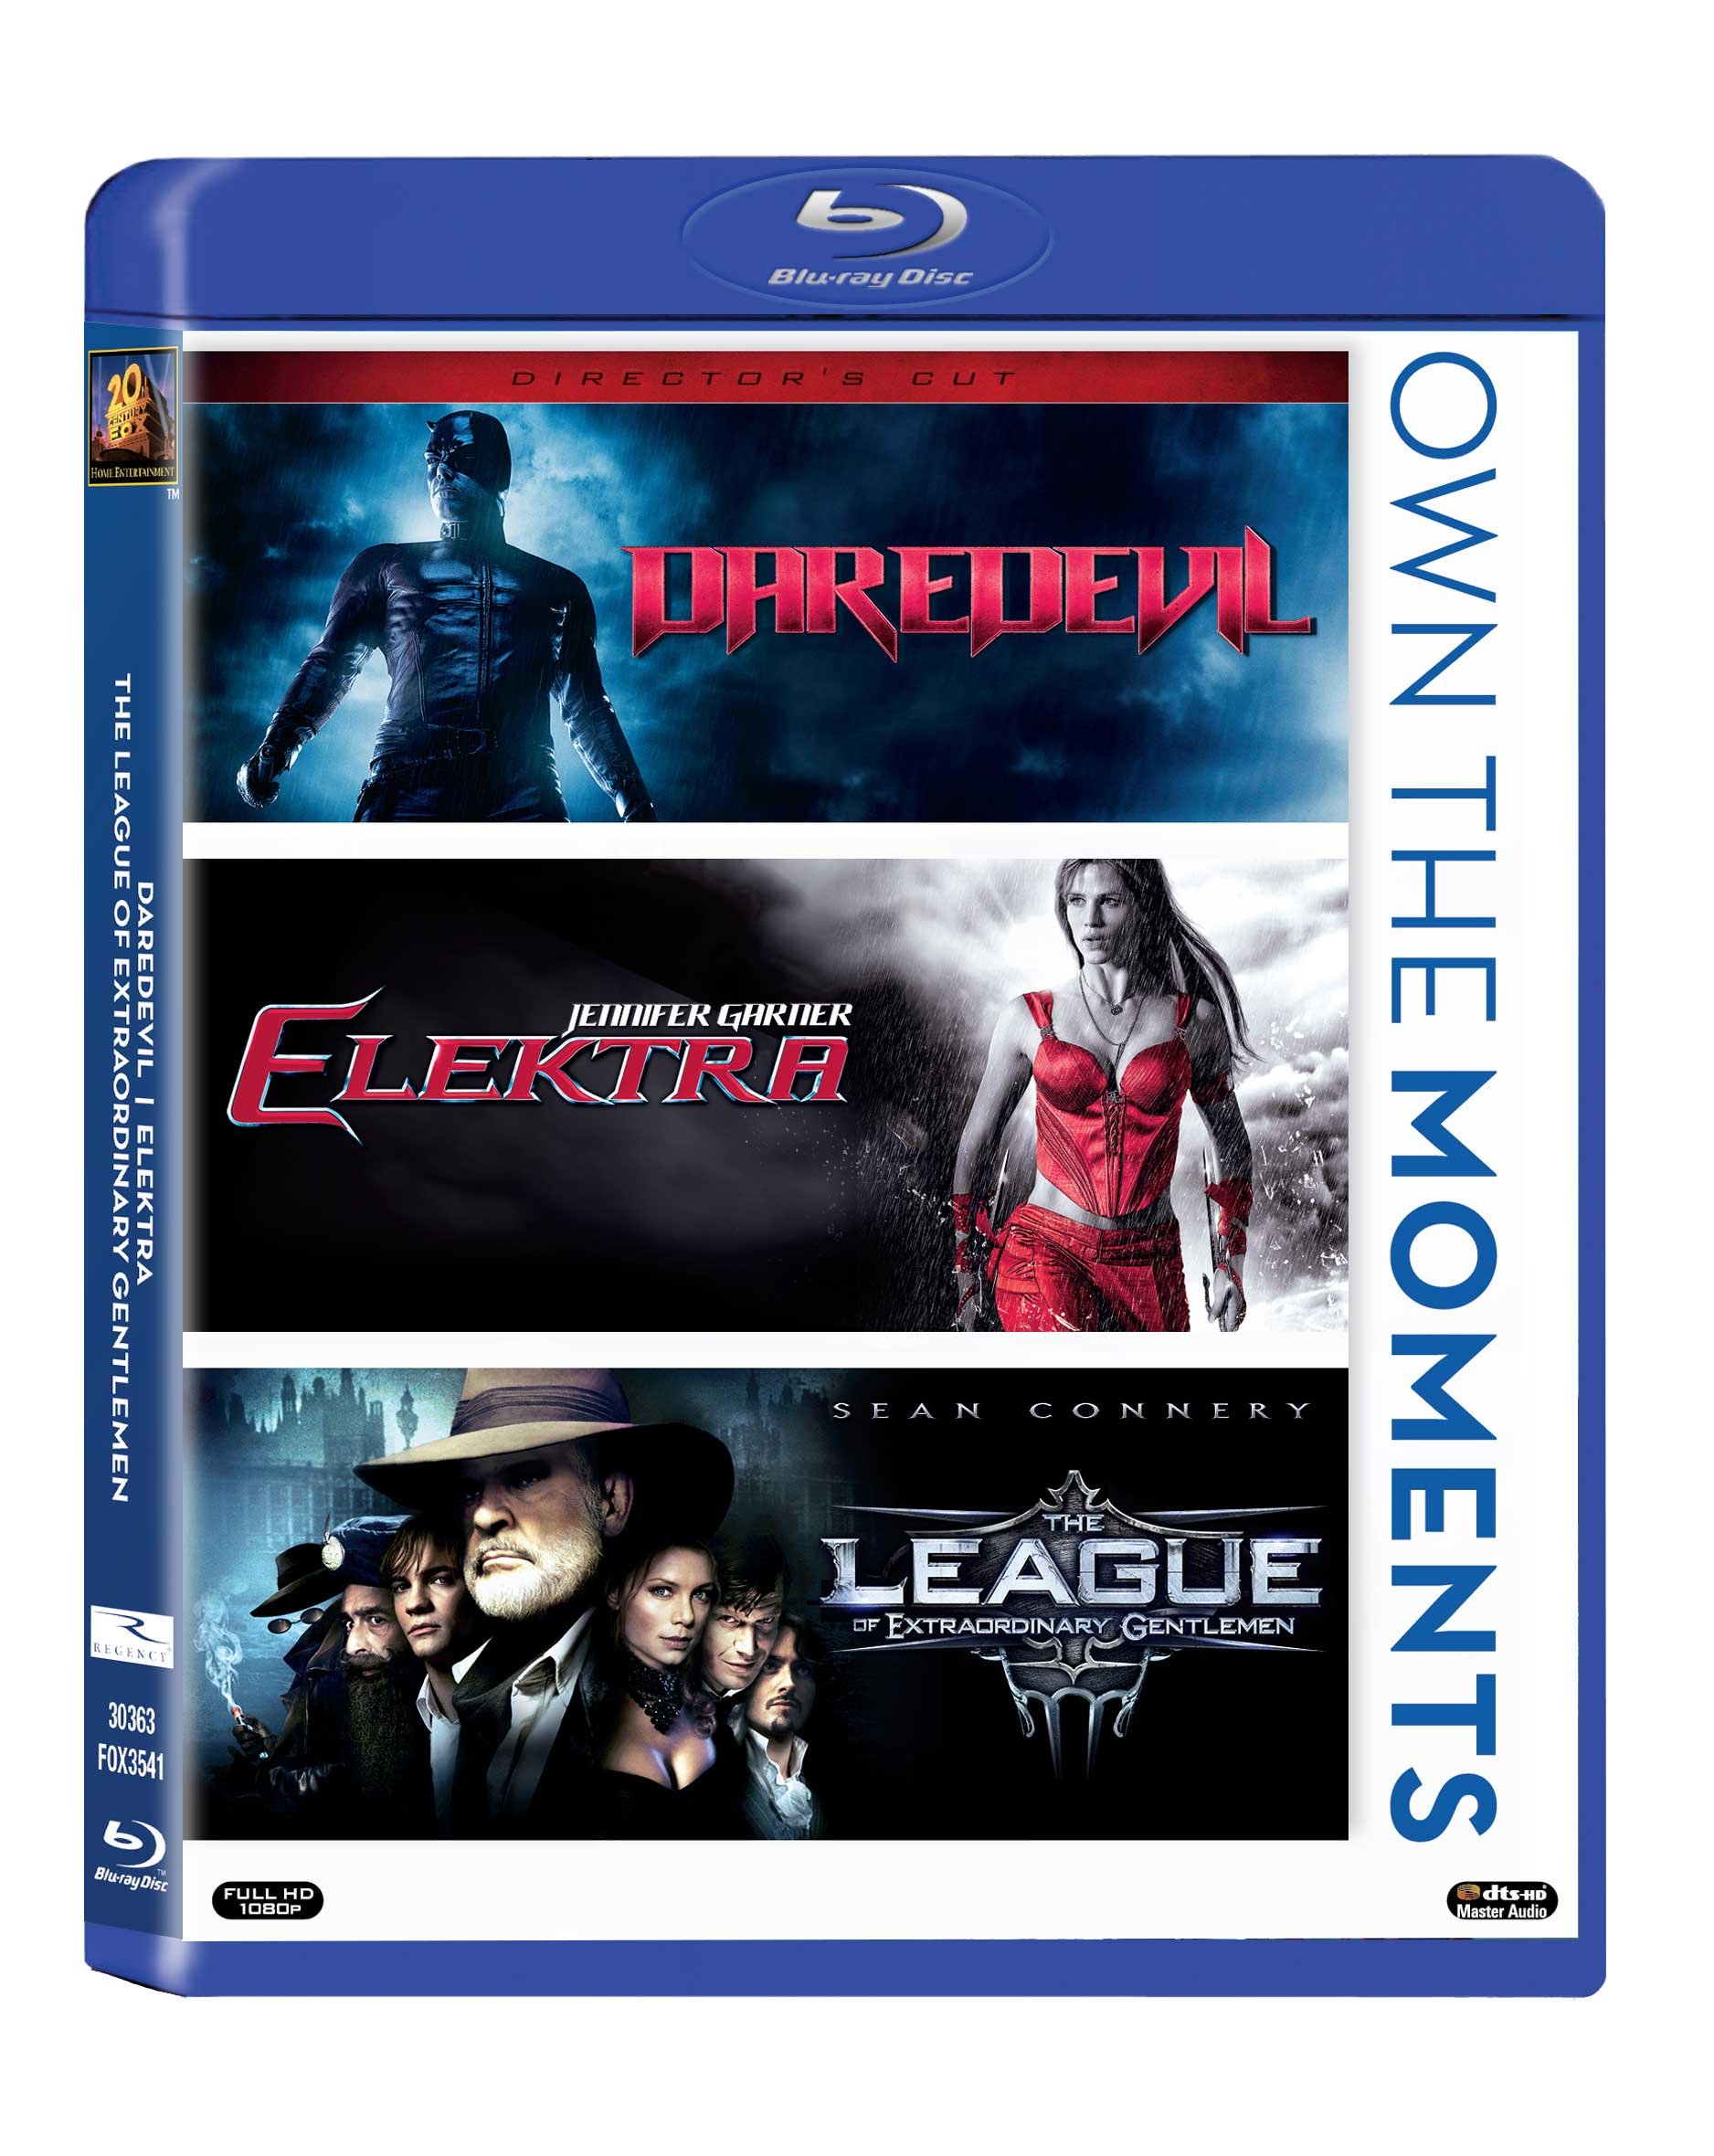 own-the-moments-3-movies-collection-daredevil-elektra-the-league-of-extraordinary-gentlemen-3-disc-box-set